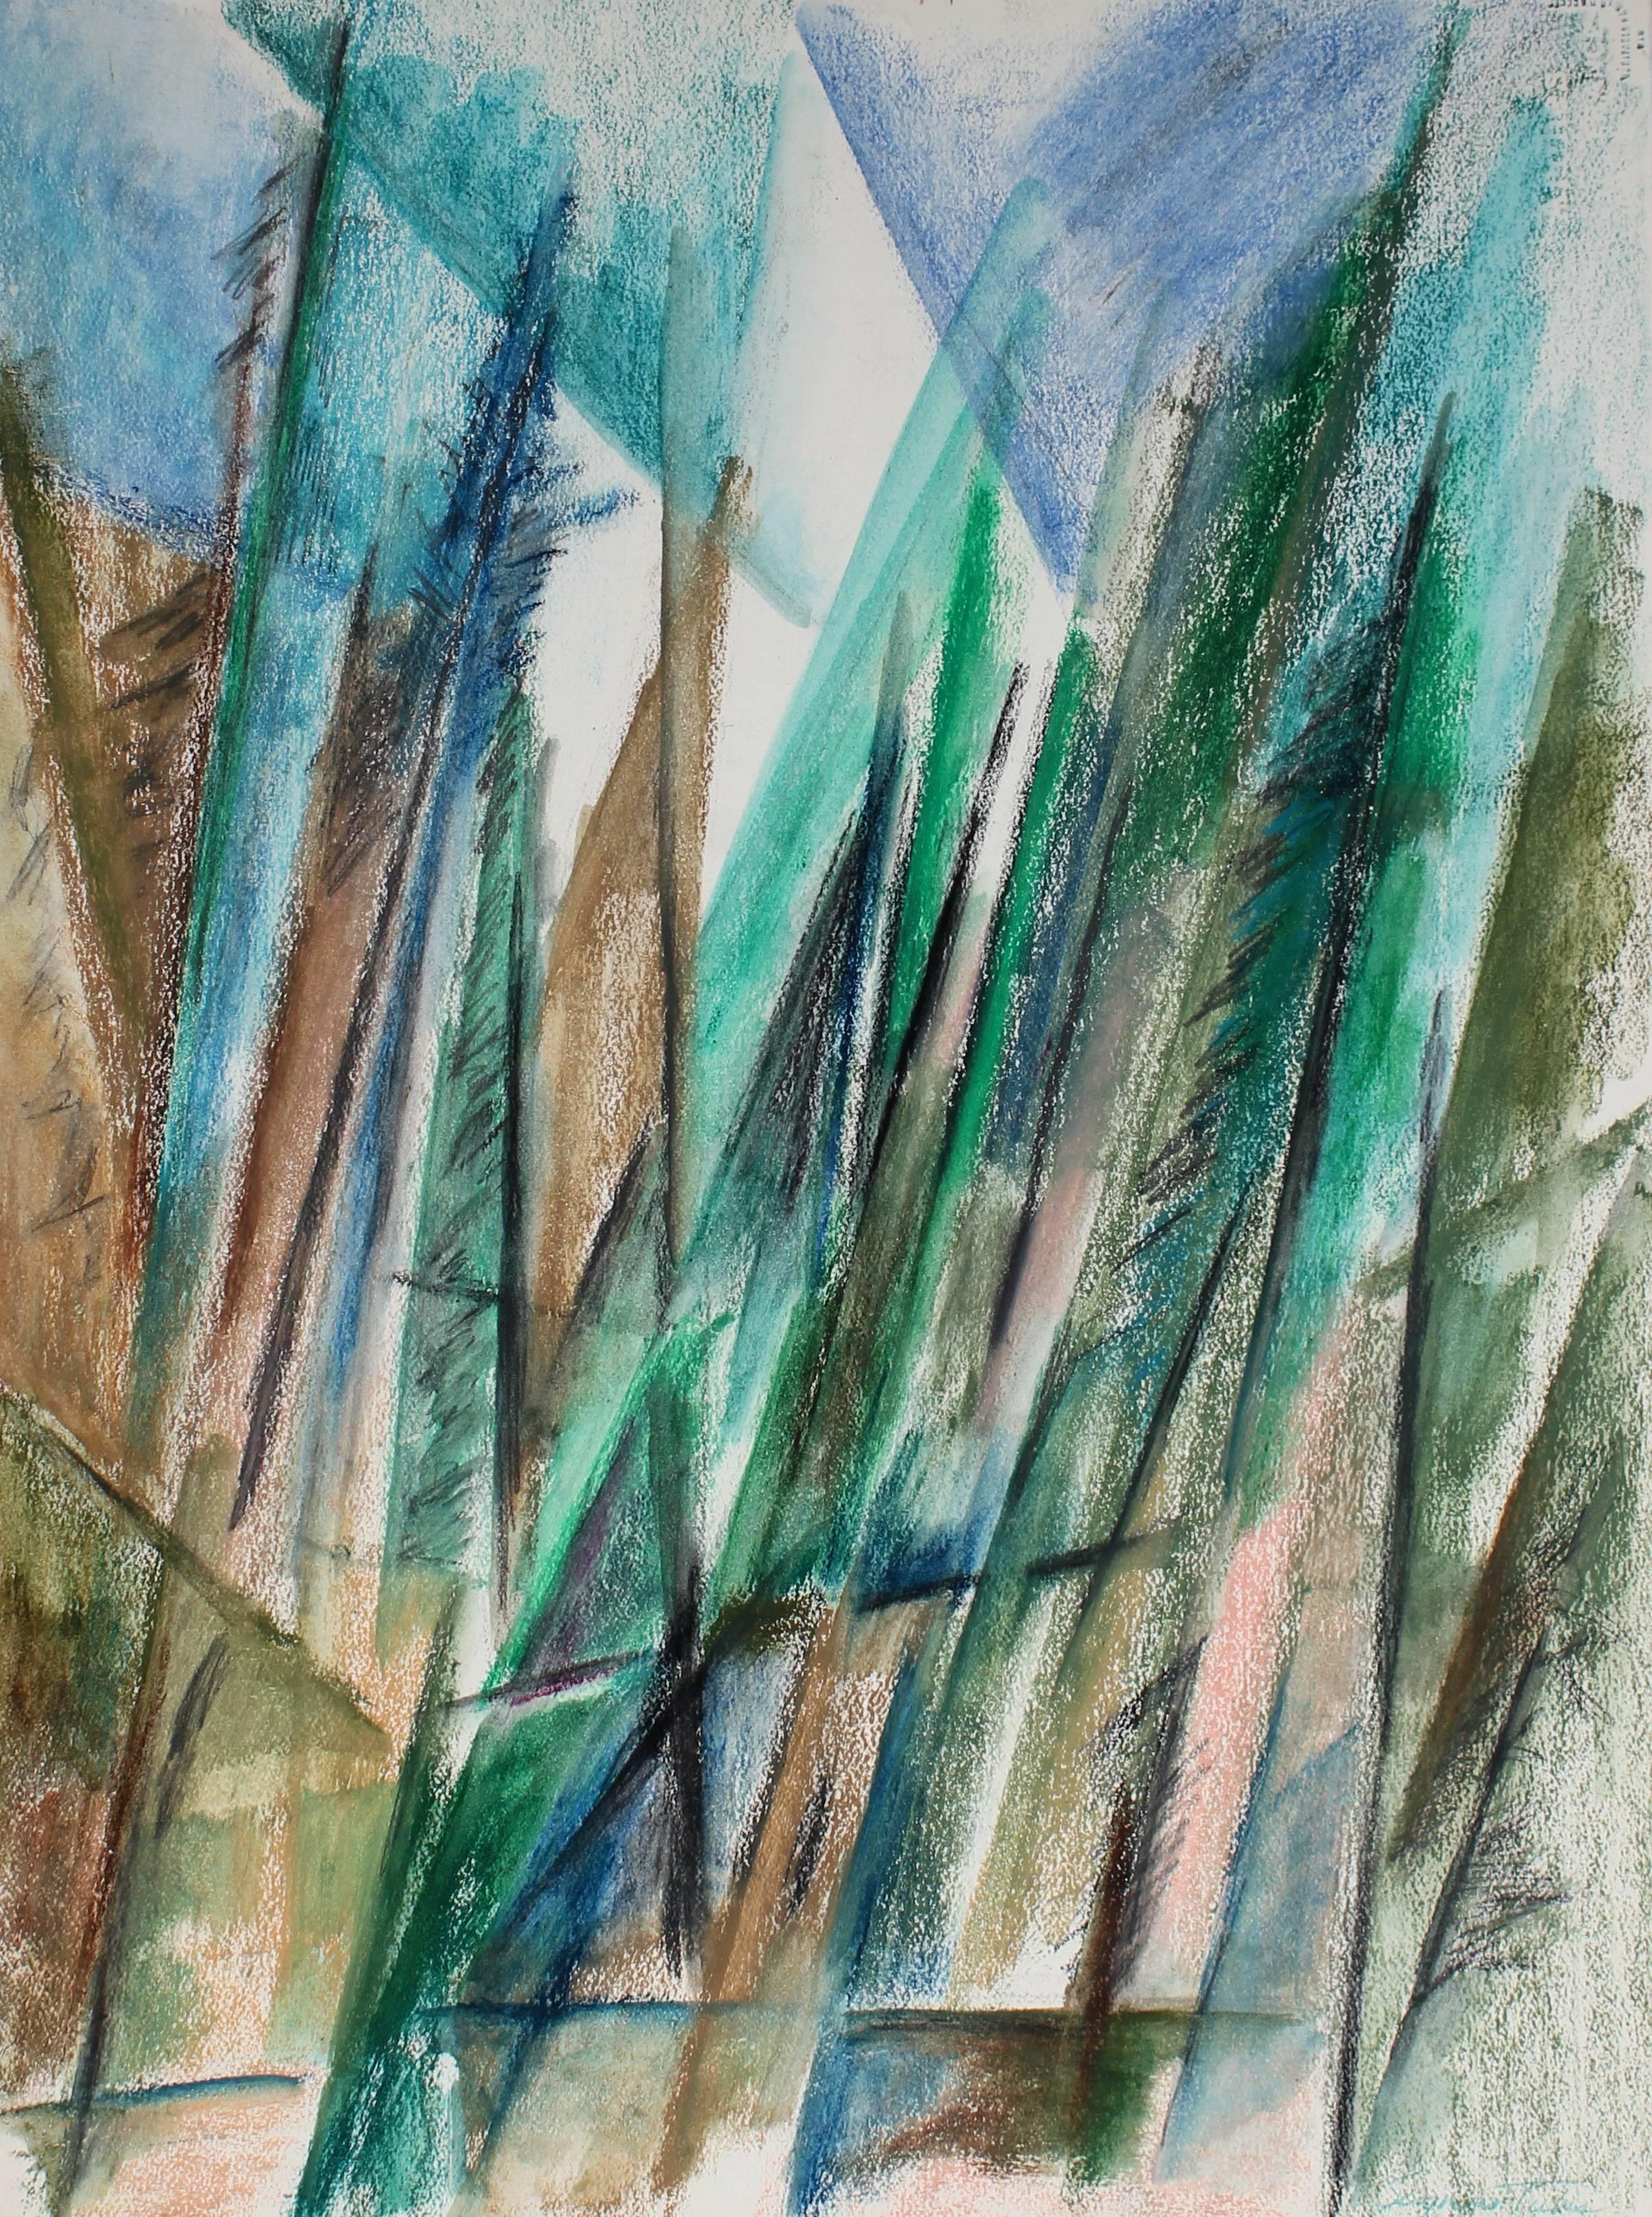 Seymour Tubis Landscape Art - Abstracted Forest Landscape in Pastel, 20th Century